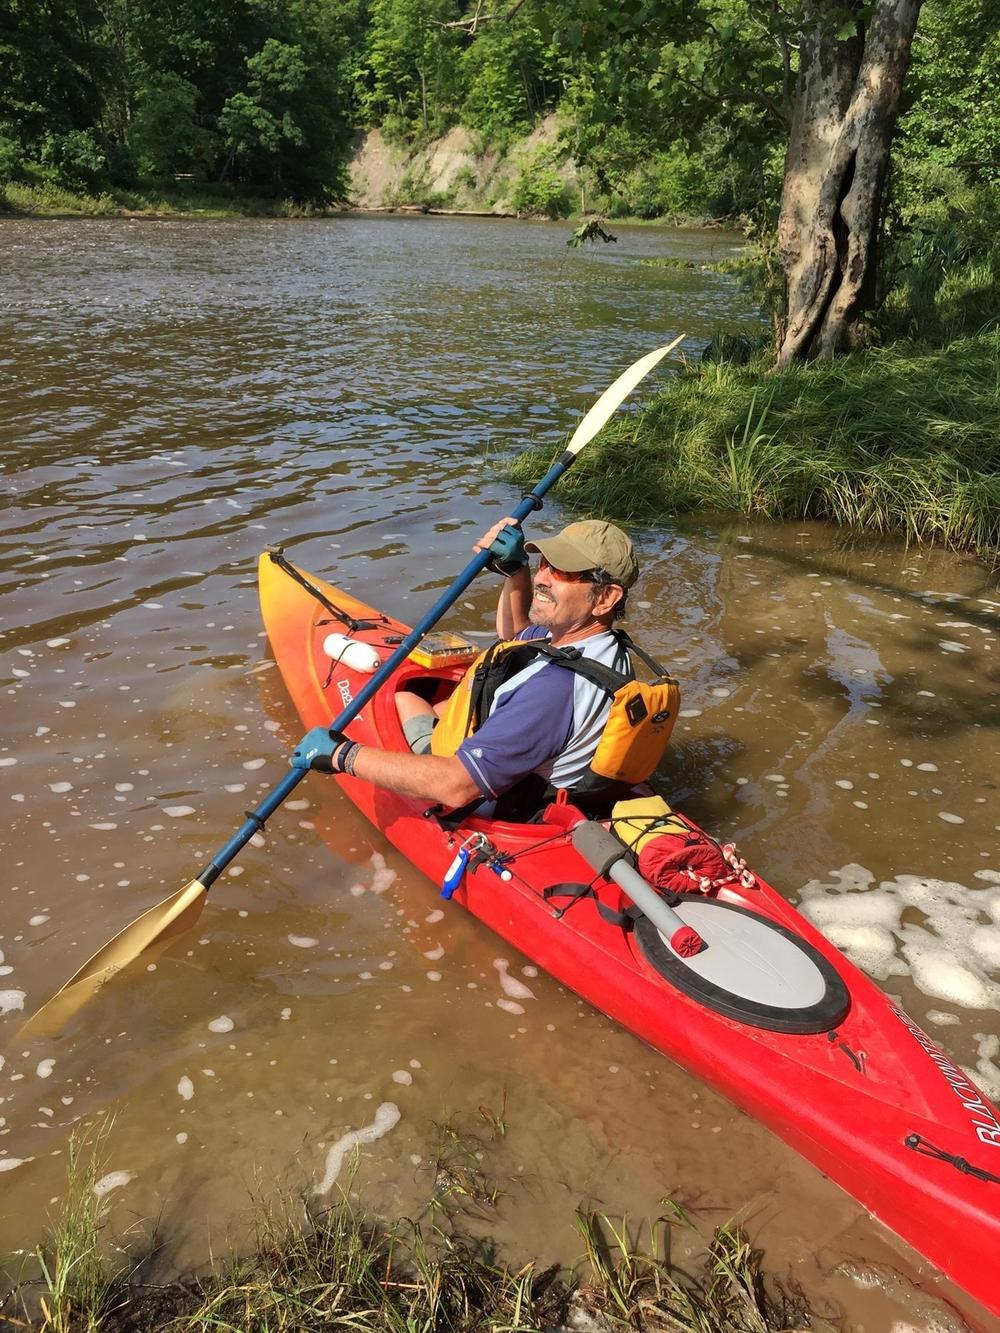 Ken enjoys a paddle on Ohio's Grand River in July 2015.